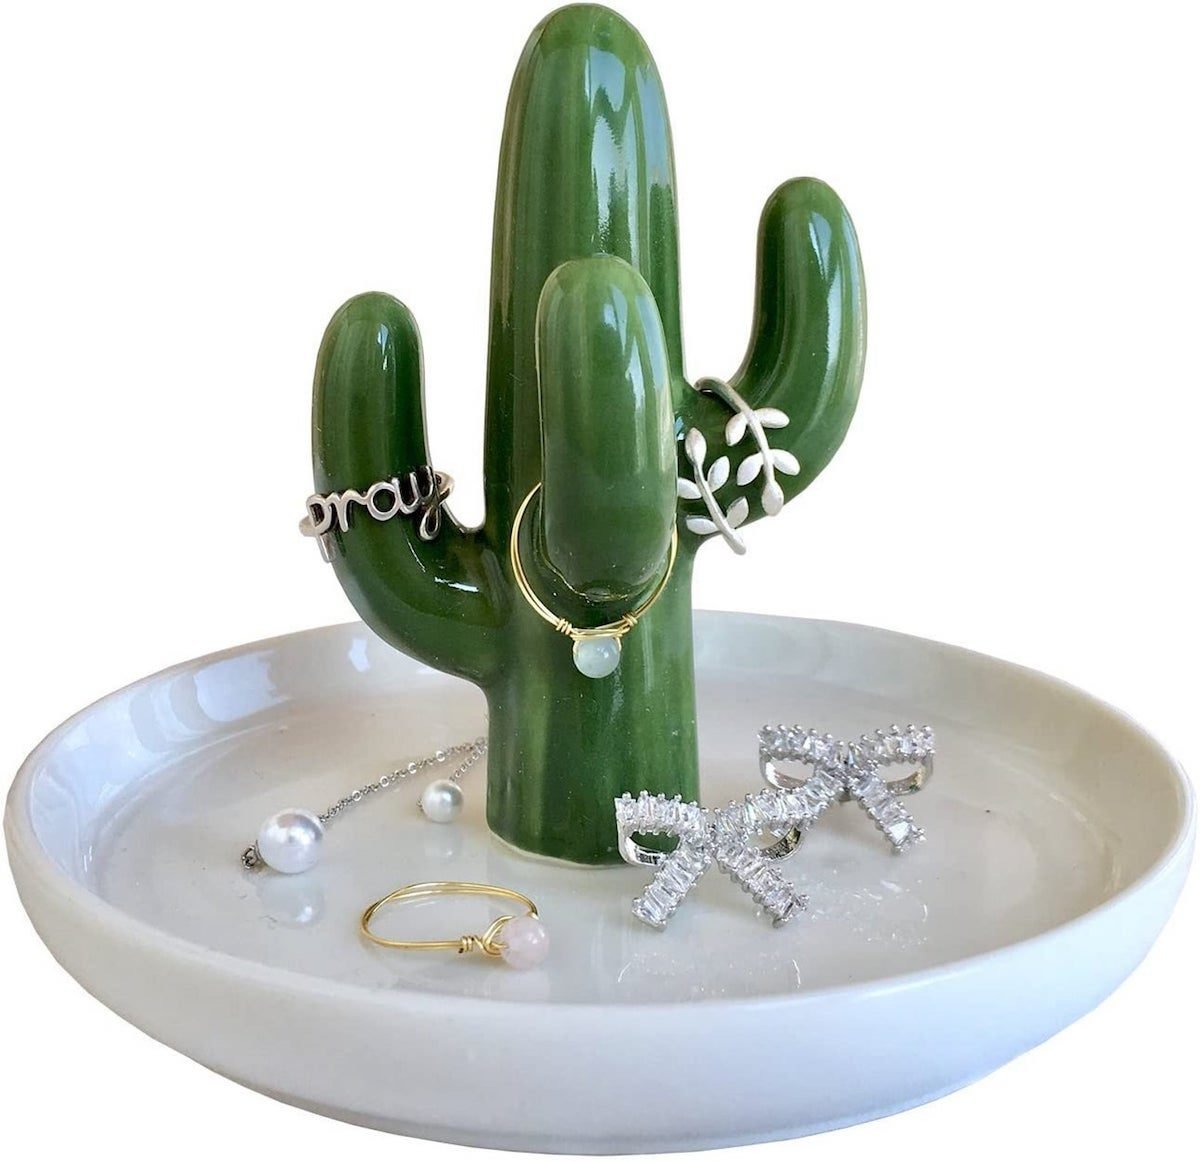 14 Cute Cactus Gifts for Cactus Lovers